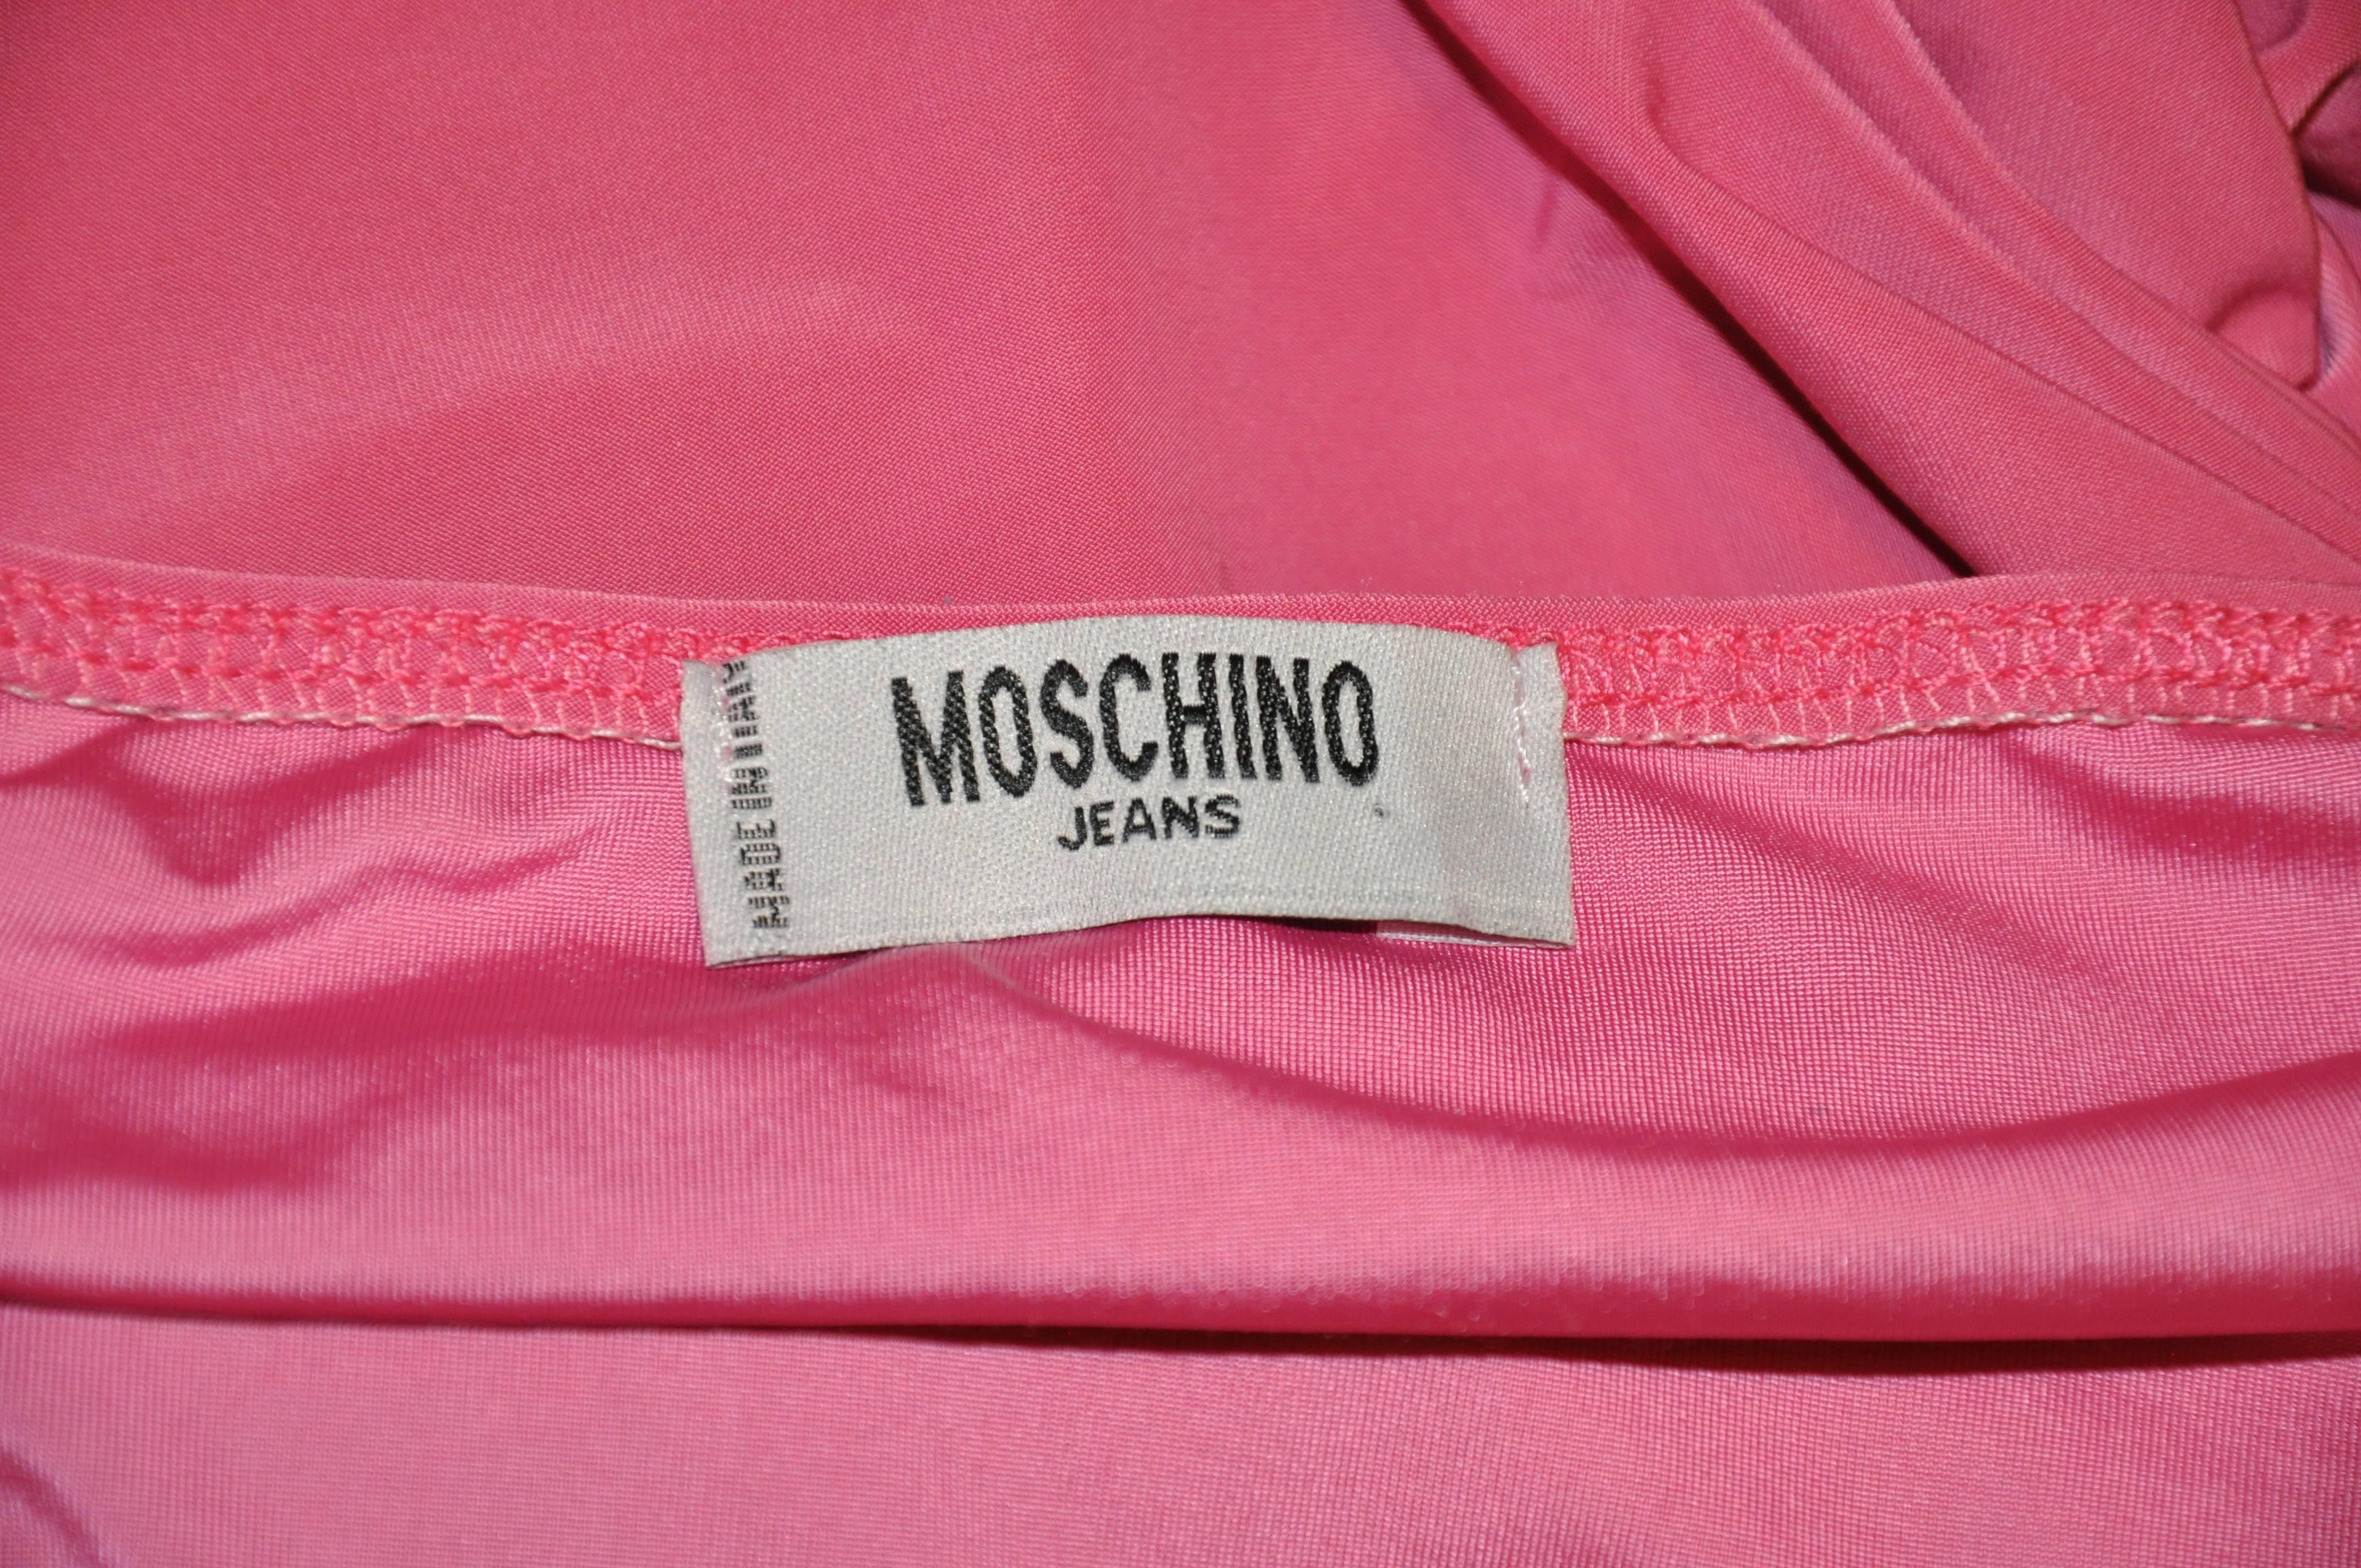        Moschino body-hugging dress in soft fuchsia is accented with detailed sequins. Made of a blend of spandex, acetate and polyester, the length measures 23